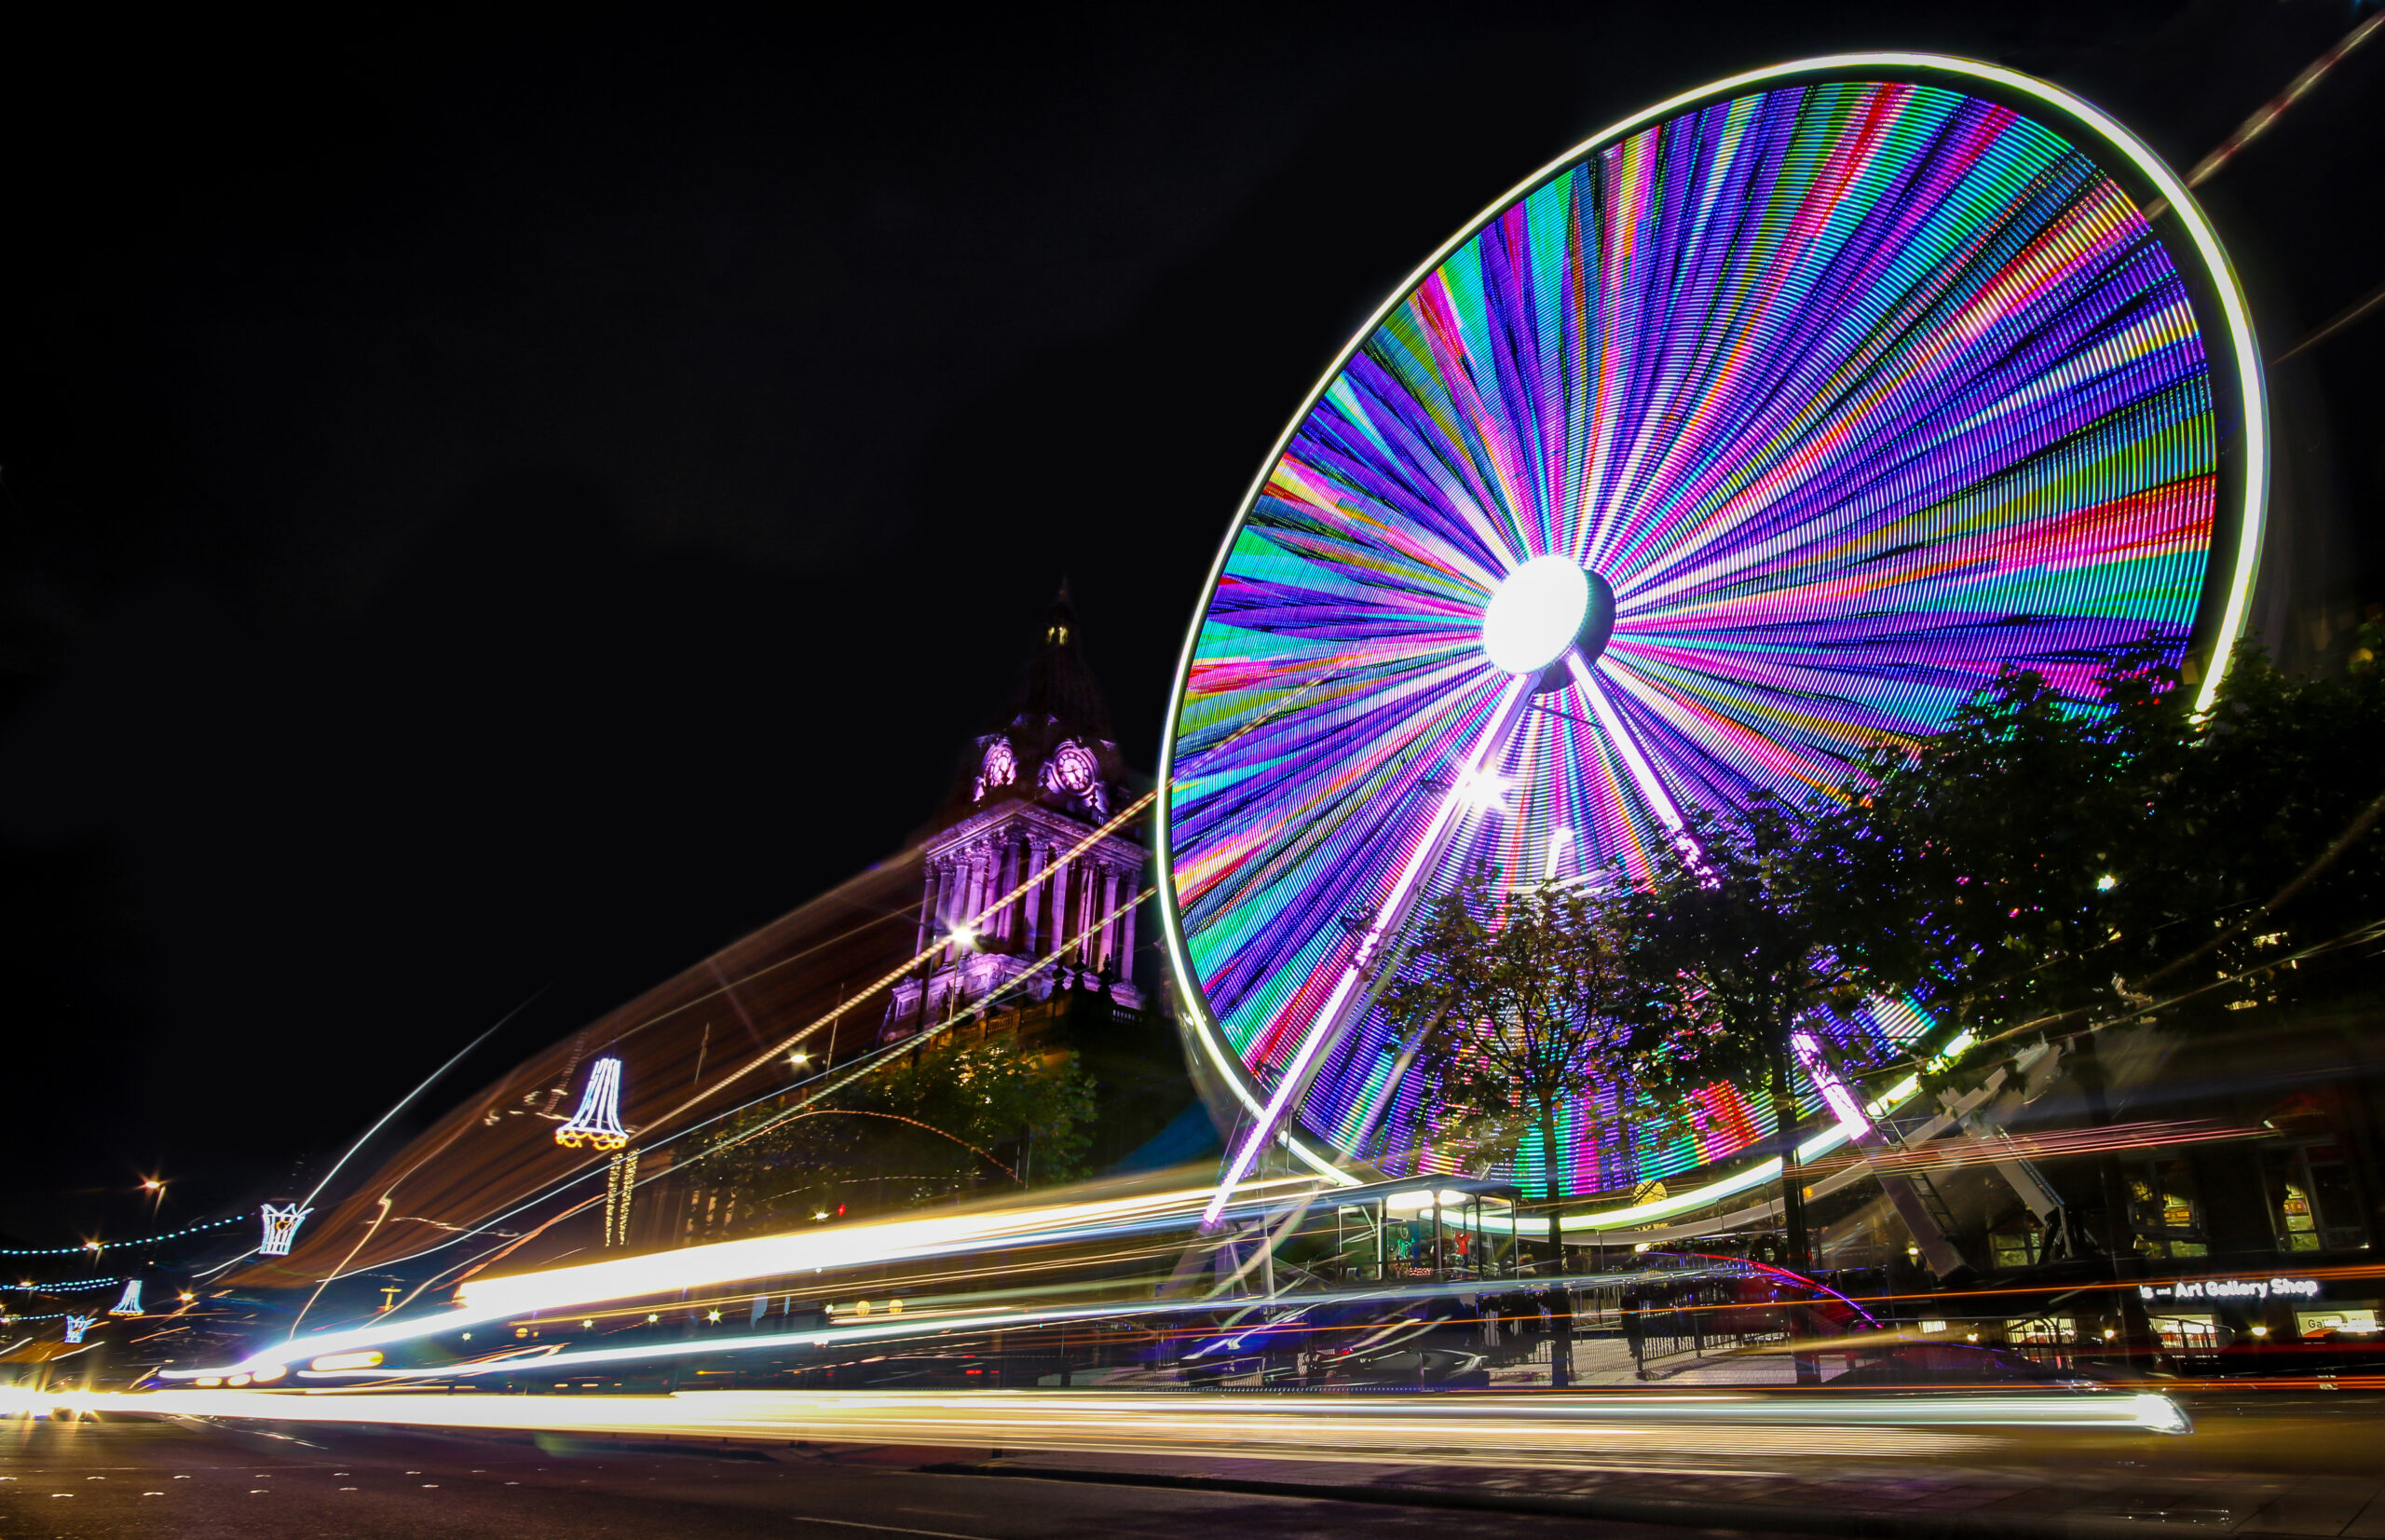 Night time image of the Leeds Wheel of Light lit up with the Town Hall in the background